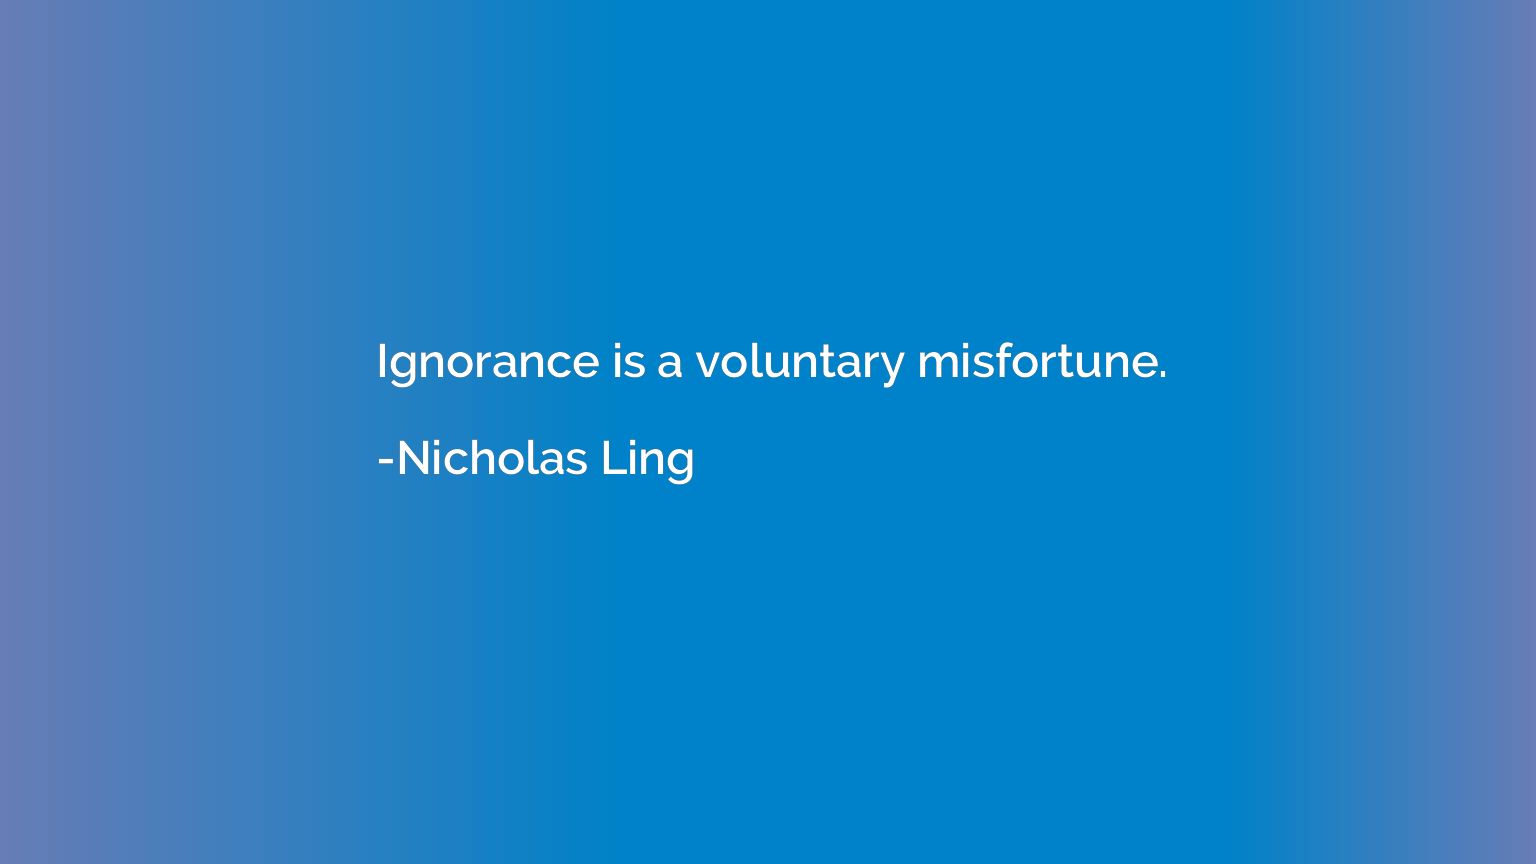 Ignorance is a voluntary misfortune.